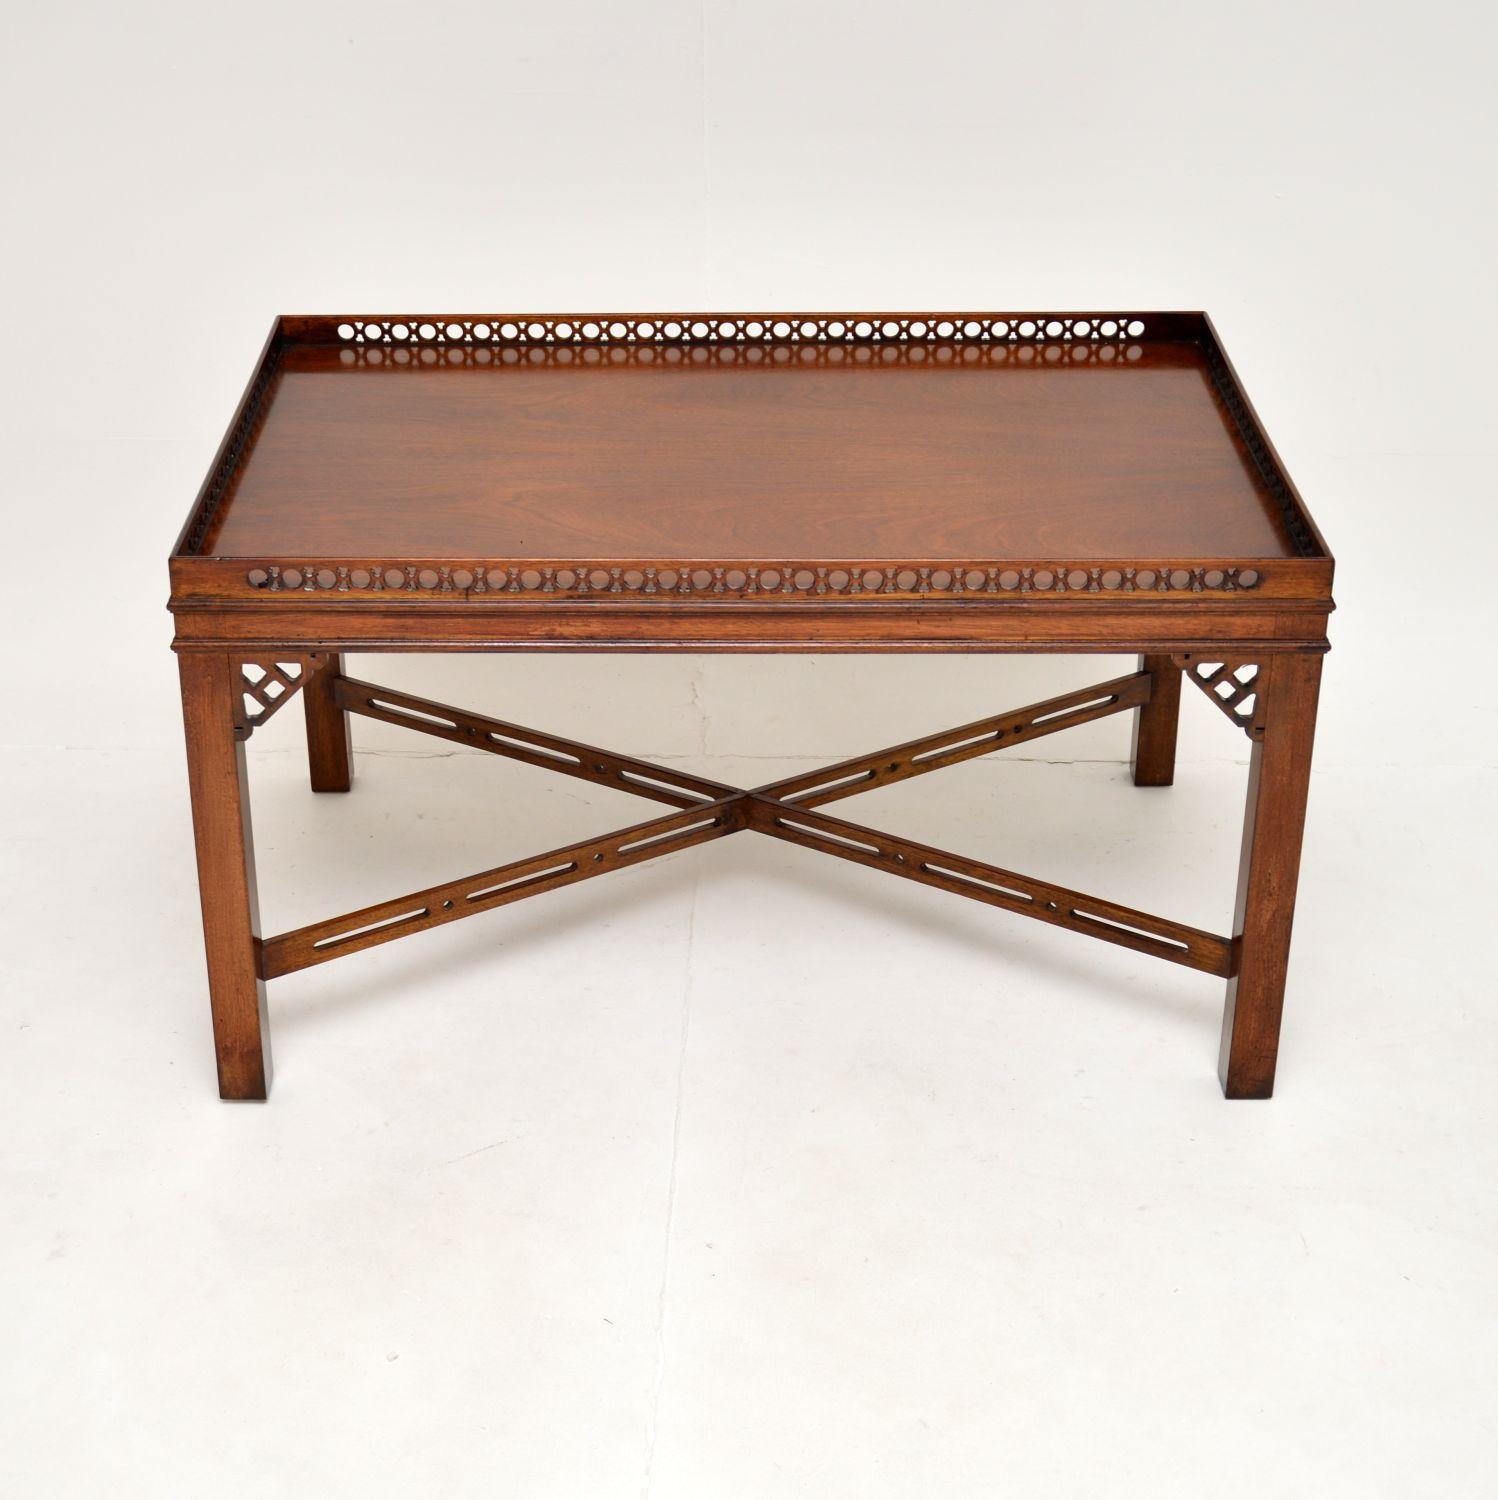 A very smart and well made antique Chippendale style coffee table. This was made in England, it dates from around the 1950’s.

The quality is superb, this has a beautiful pierced fretwork gallery around the top edge, with more lovely fretwork under